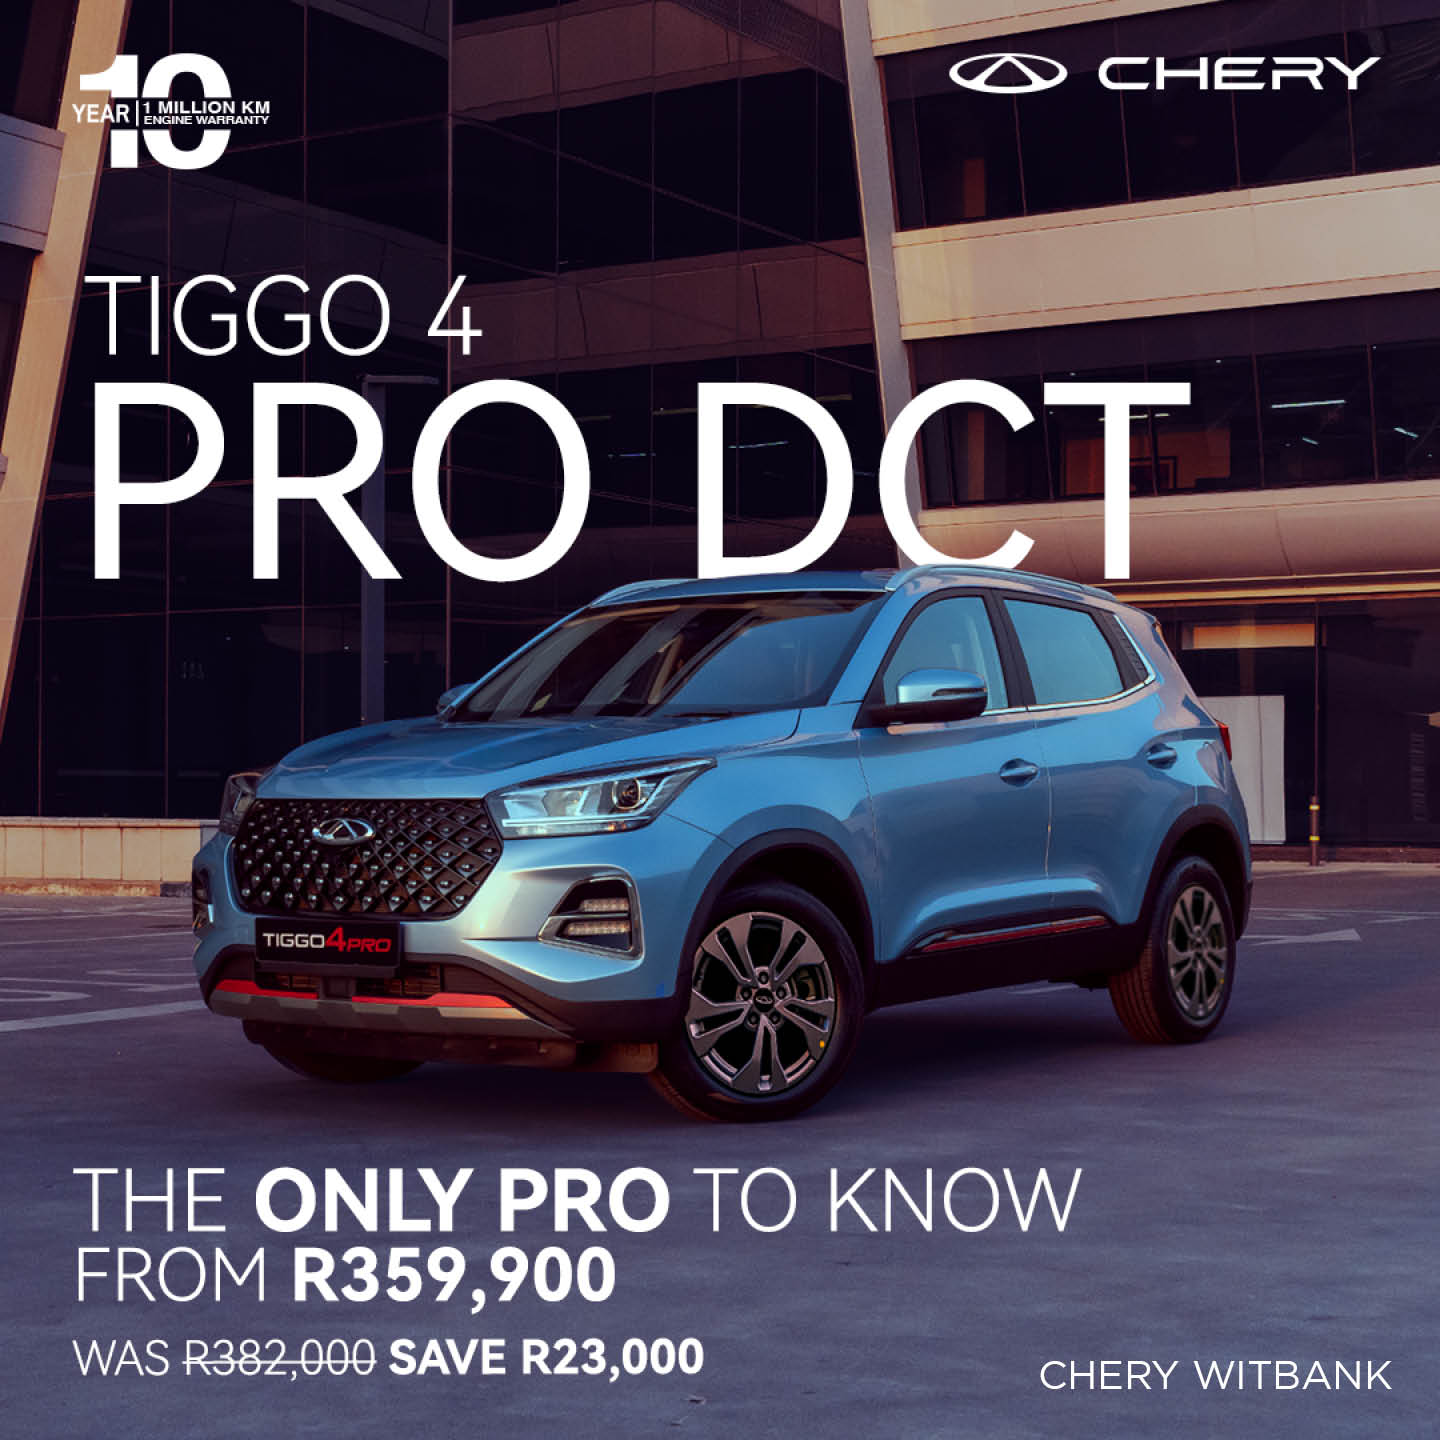 The ONLY PRO you know! TIGGO 4 PRO DCT image from Eastvaal Motors